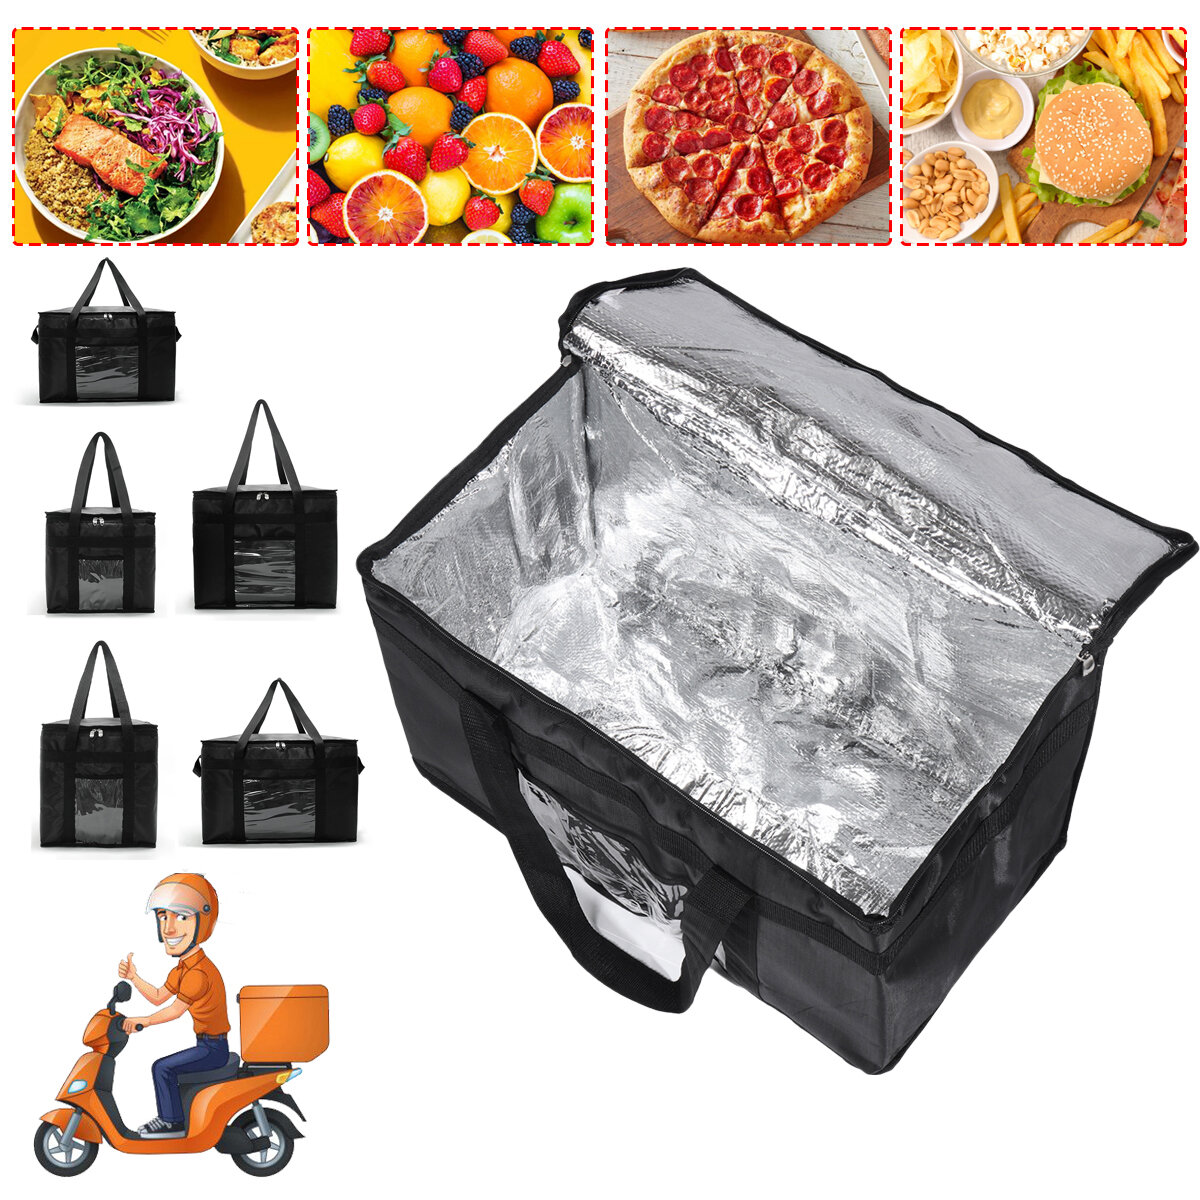 29.2/34.8/58.3/51.4/74.6L Food Delivery Bag Thermal Insulated Takeaway Bag Camping Picnic Bag